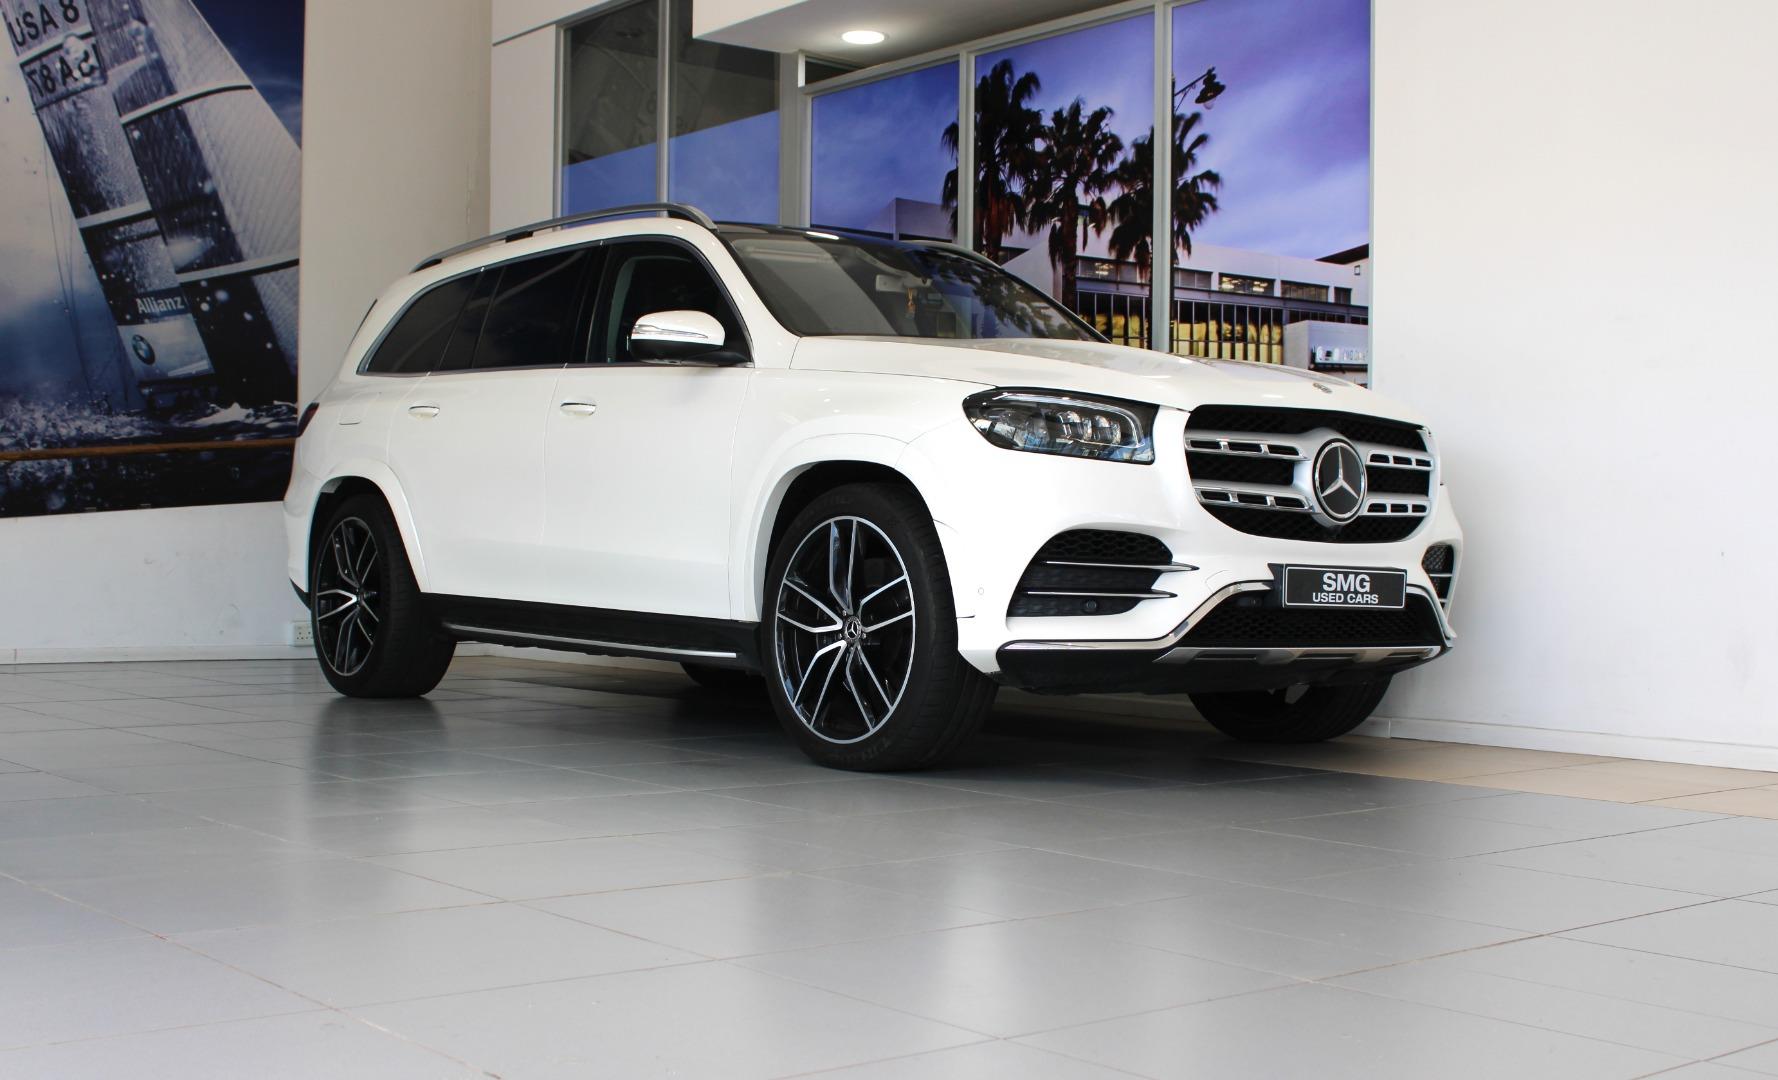 2020 Mercedes-Benz GLS400d AMG Line  for sale - SMG12|USED|Consignment Unit RM